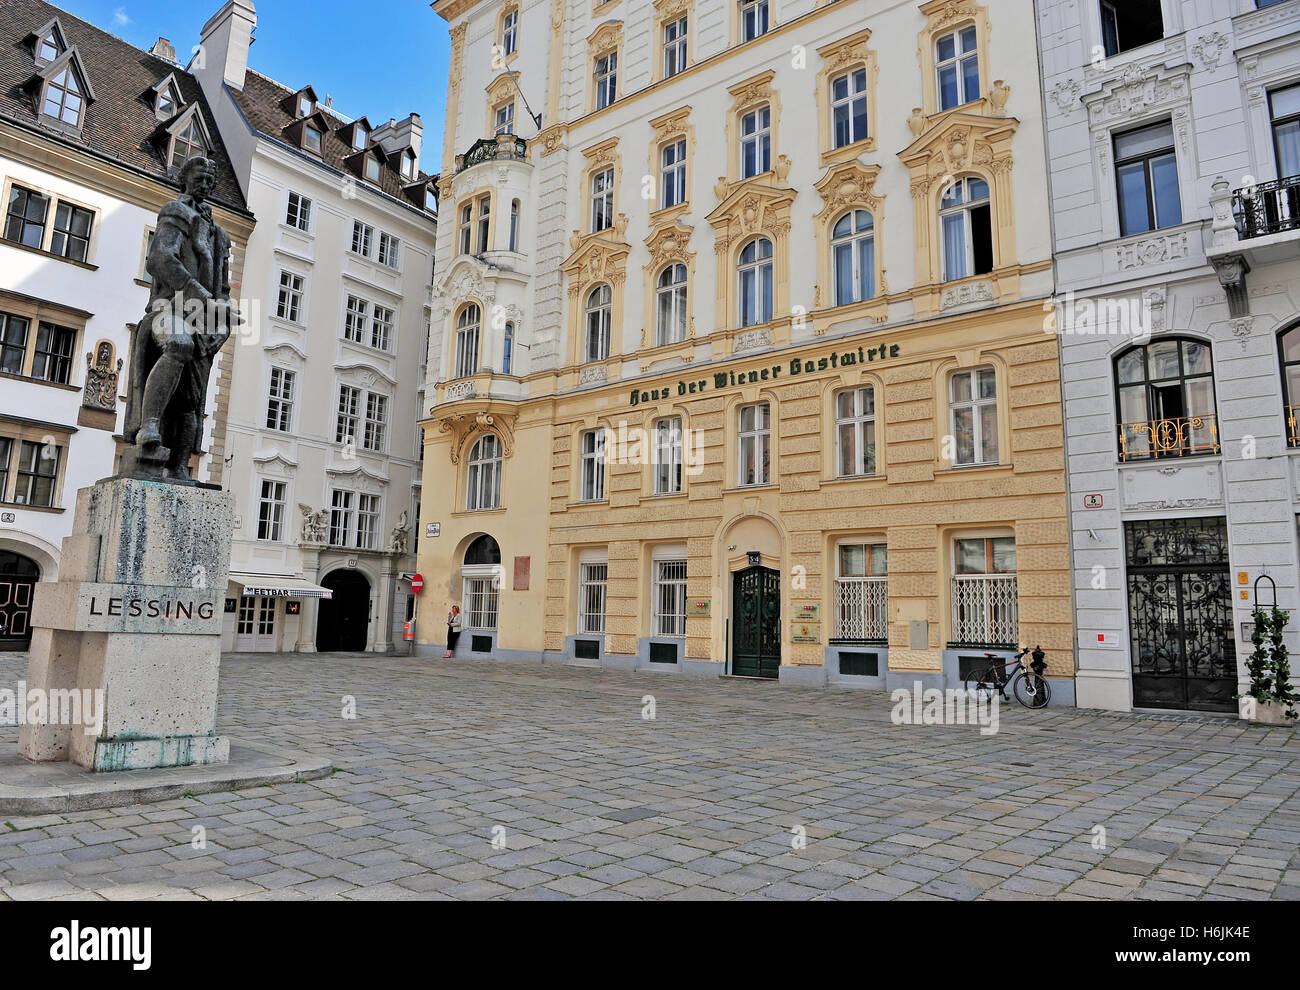 VIENNA, AUSTRIA - JUNE 6: View of the street in historical centre of Vienna on June 6, 2016. Vienna is a capital and largest cit Stock Photo